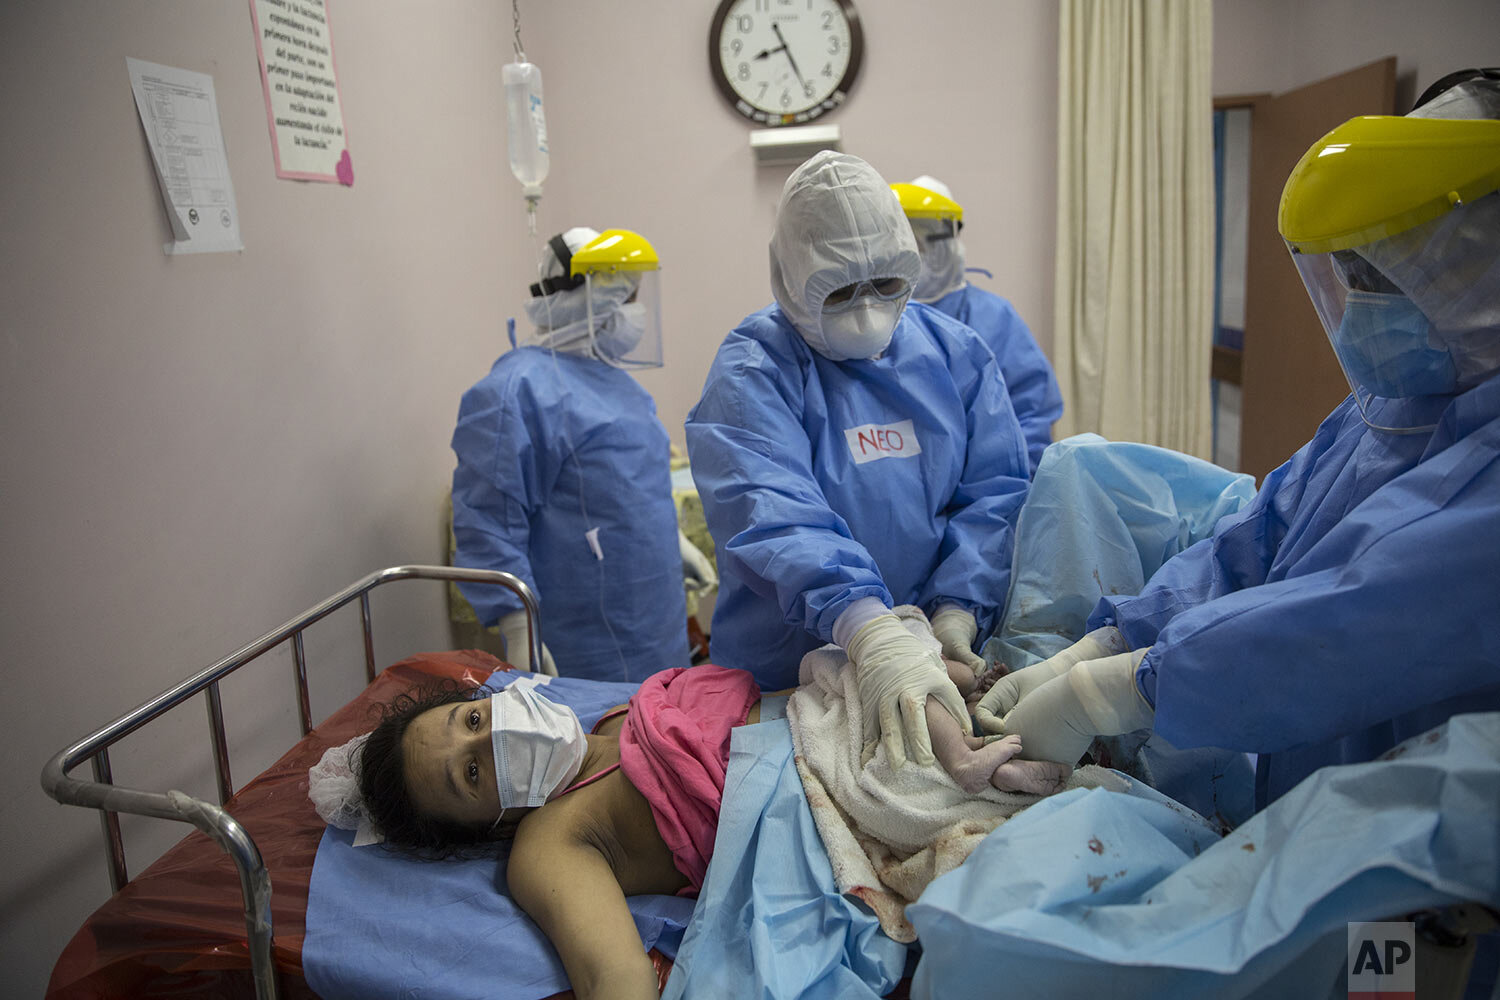  Maria Alvarez waits to be handed her newborn baby girl as an obstetrician and neonatologist clamp the baby’s umbilical cord, at the National Maternal Perinatal Institute in Lima, Peru, Wednesday, July 29, 2020. (AP Photo/Rodrigo Abd) 